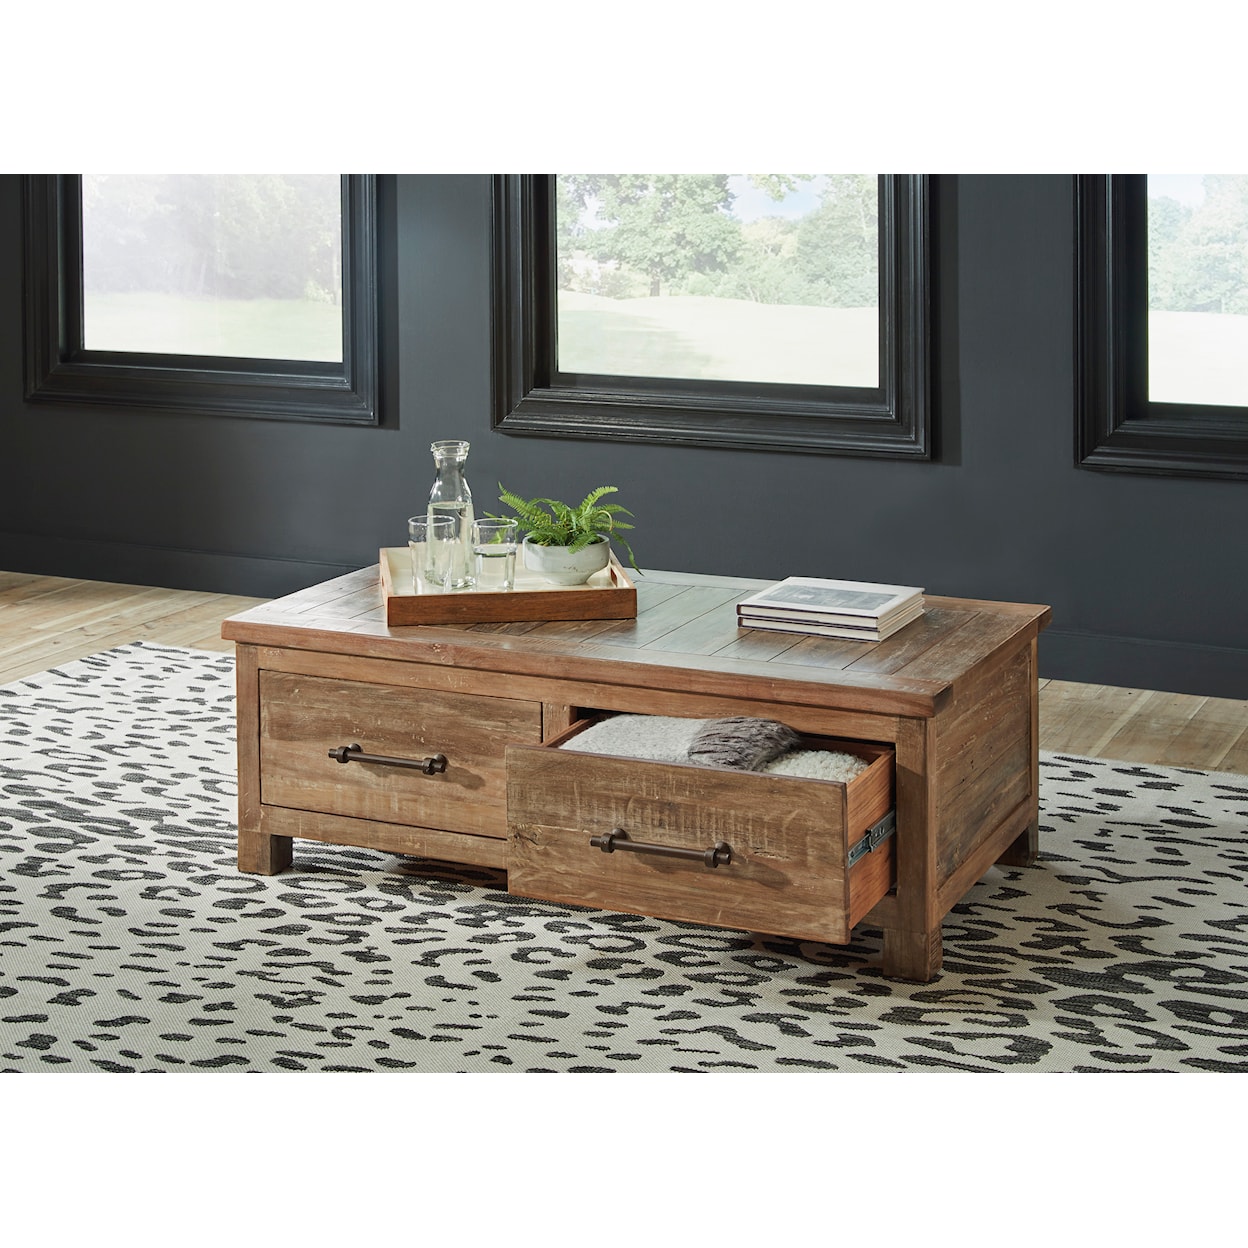 Signature Design by Ashley Randale Coffee Table